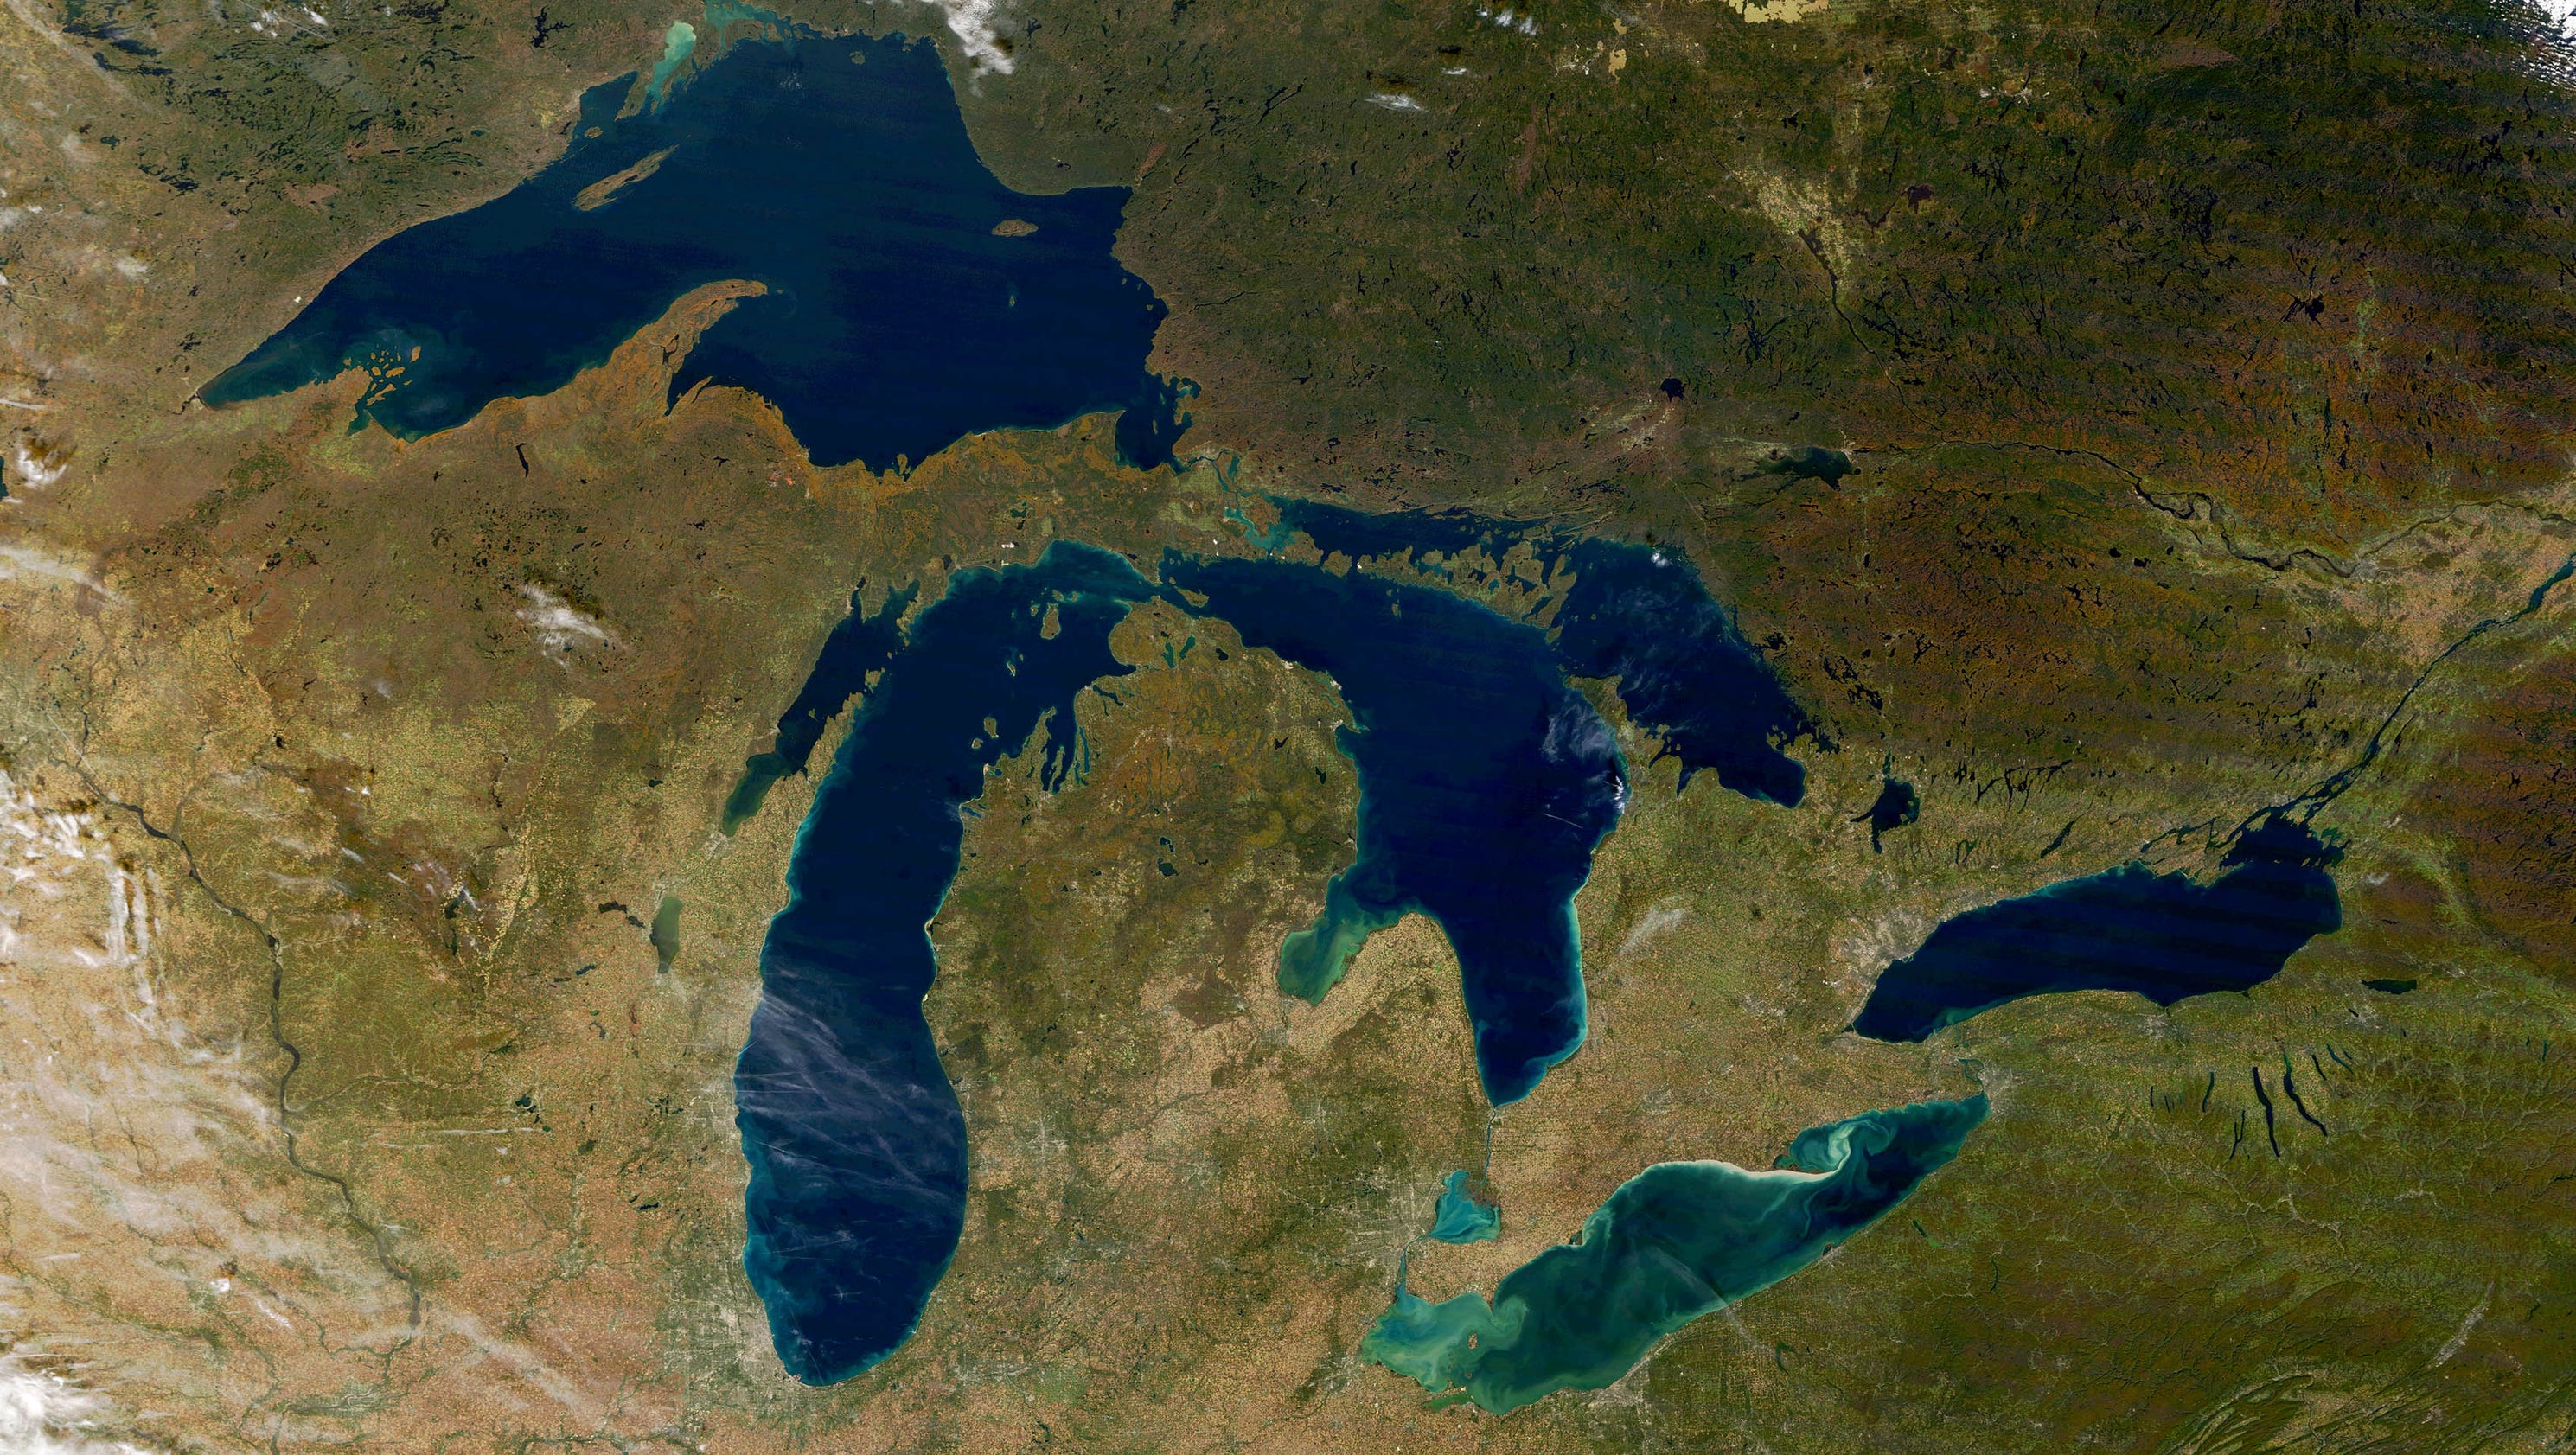 Warm Great Lakes could mean lake-effect snow